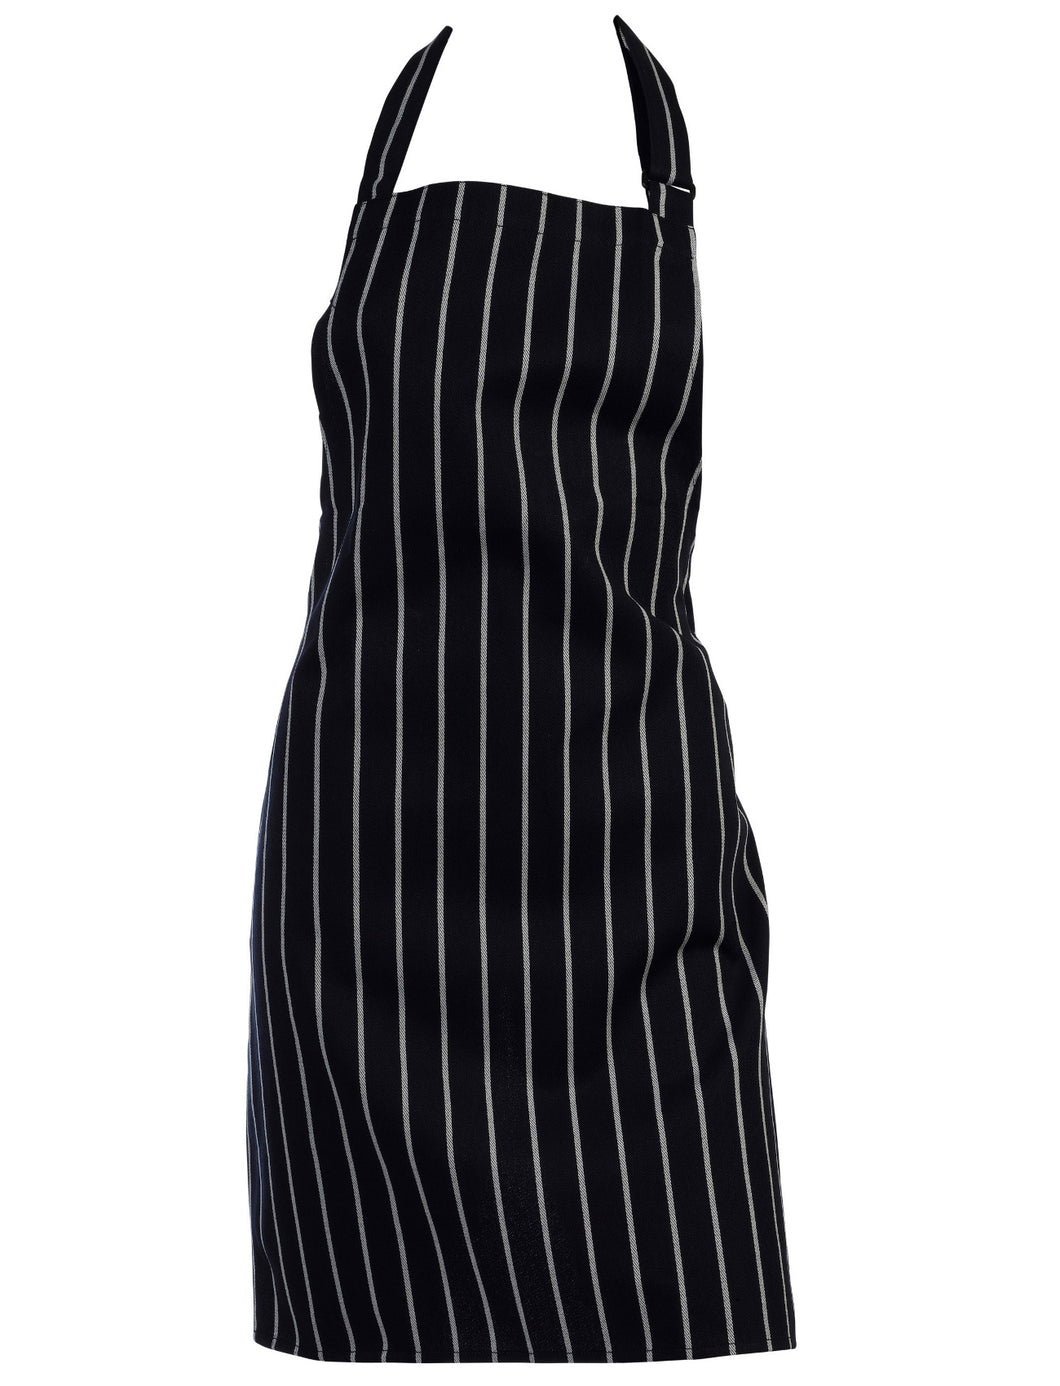 Children's Butchers Apron with Adjustable Neck - Age 10-14 (Navy)